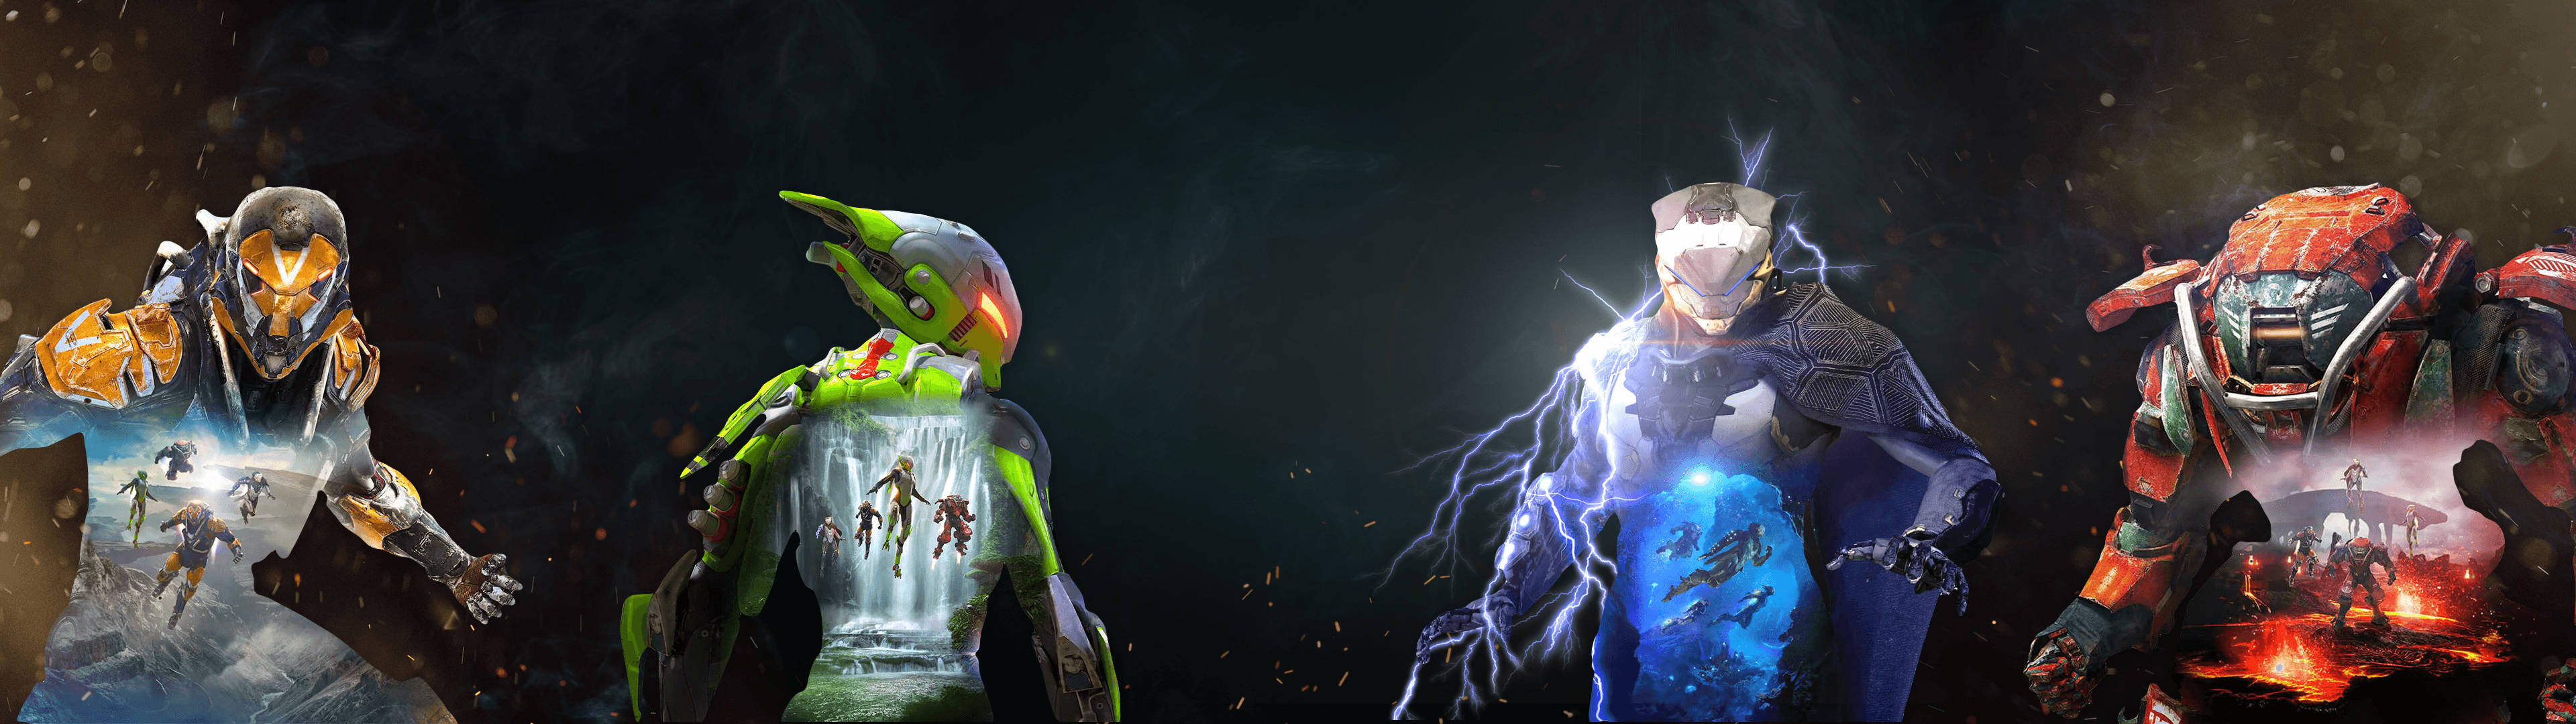 Anthem 3840X1080 Wallpaper and Background Image